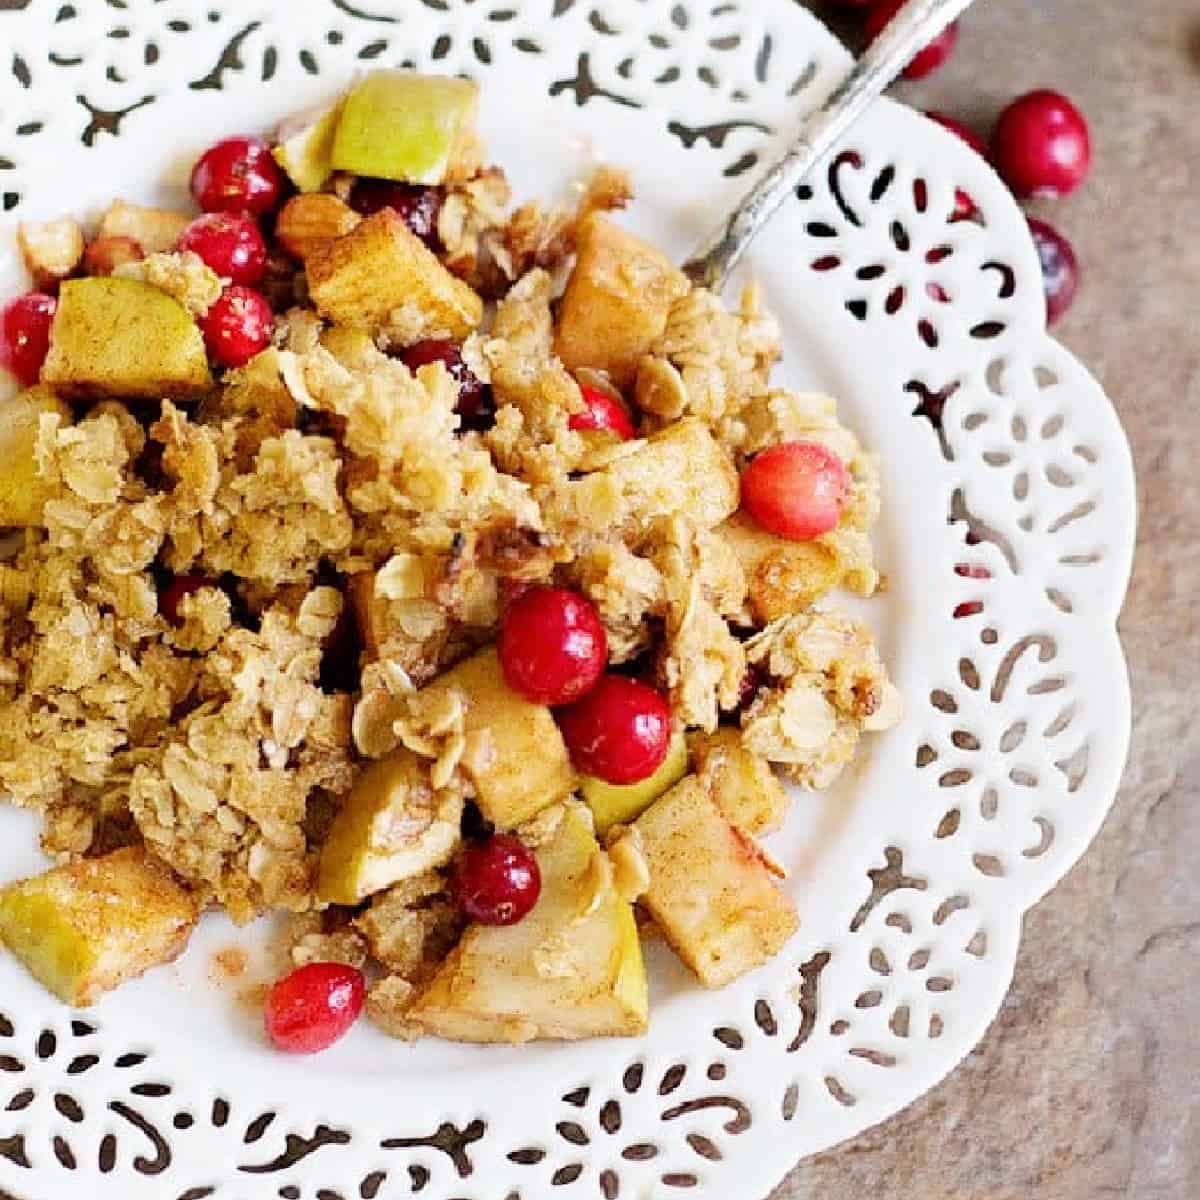 Apple Cranberry Almond Crisp is great for chill evenings. Tart apples and juicy cranberries bring together the perfect texture and flavor. This dish gets better with every bite!
